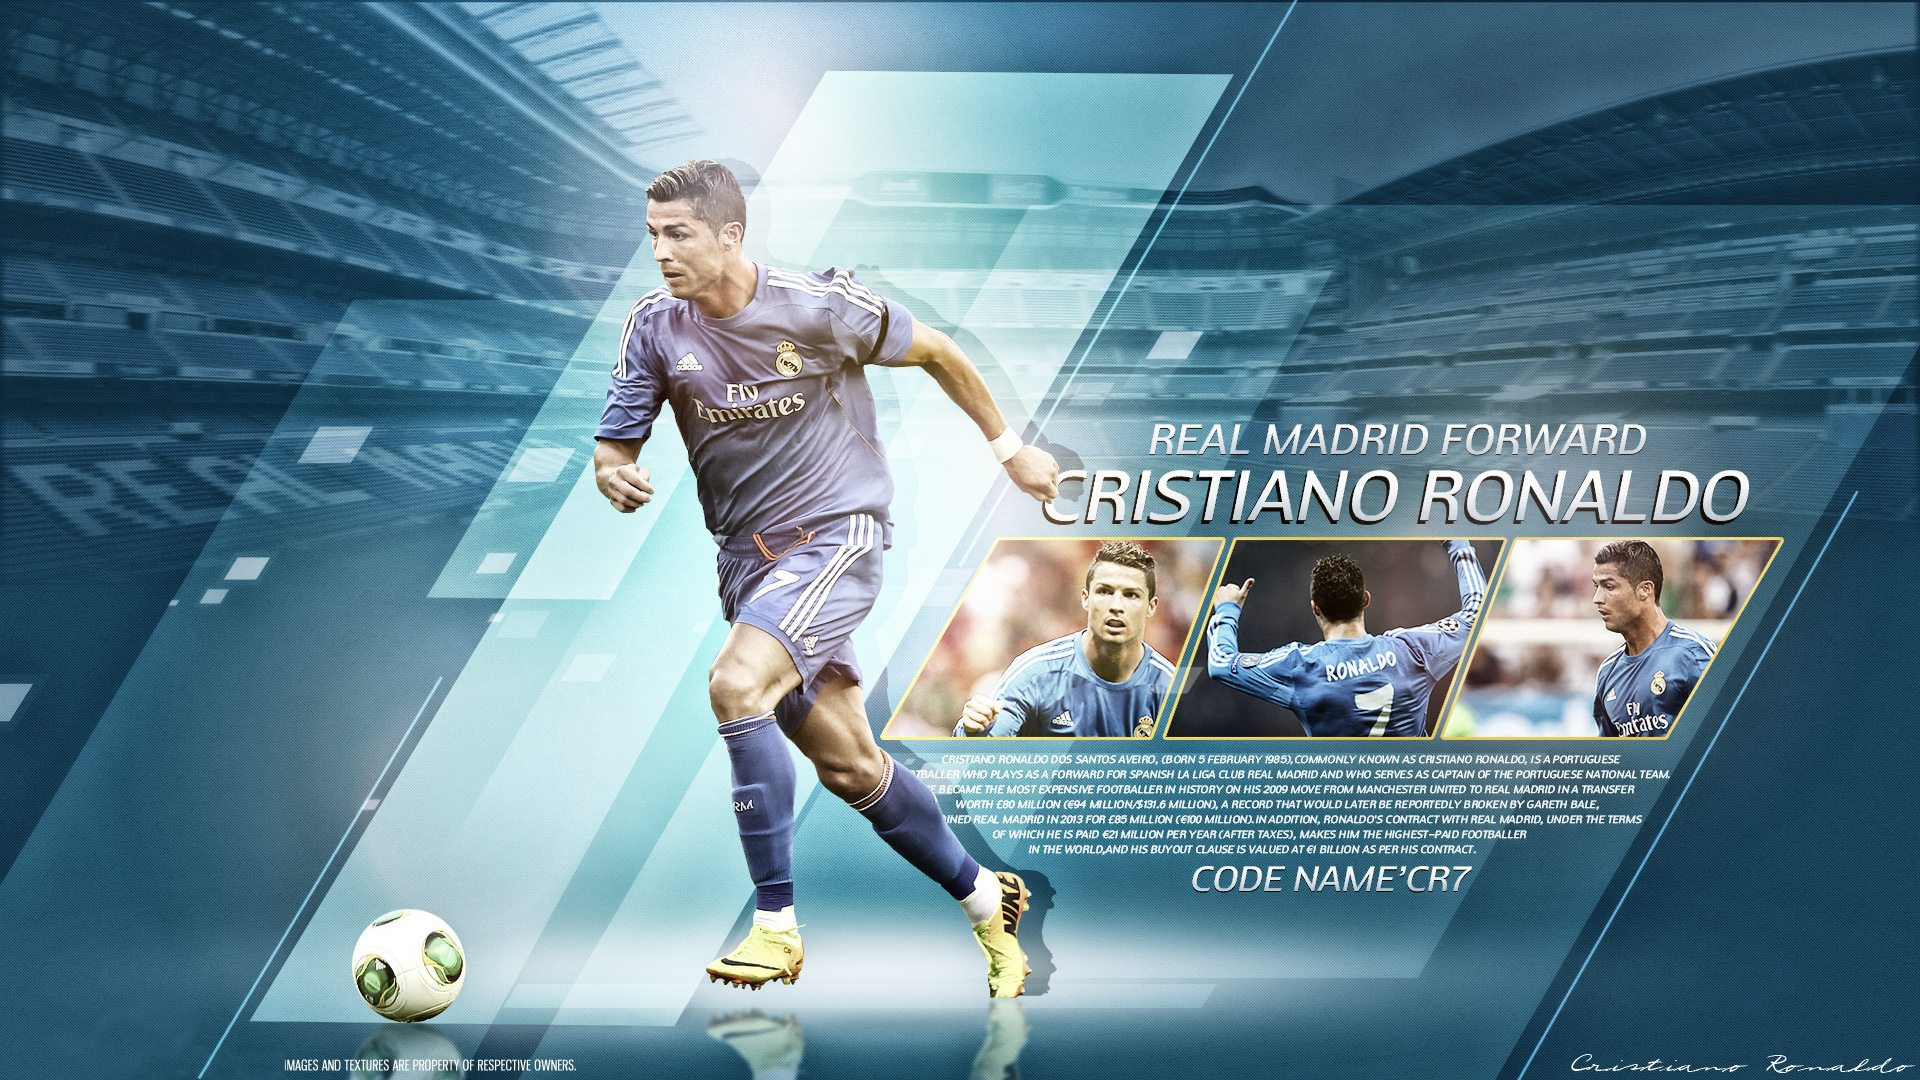 CR7 Wallpaper By Destroyer53 Cristiano Ronaldo Wallpapers